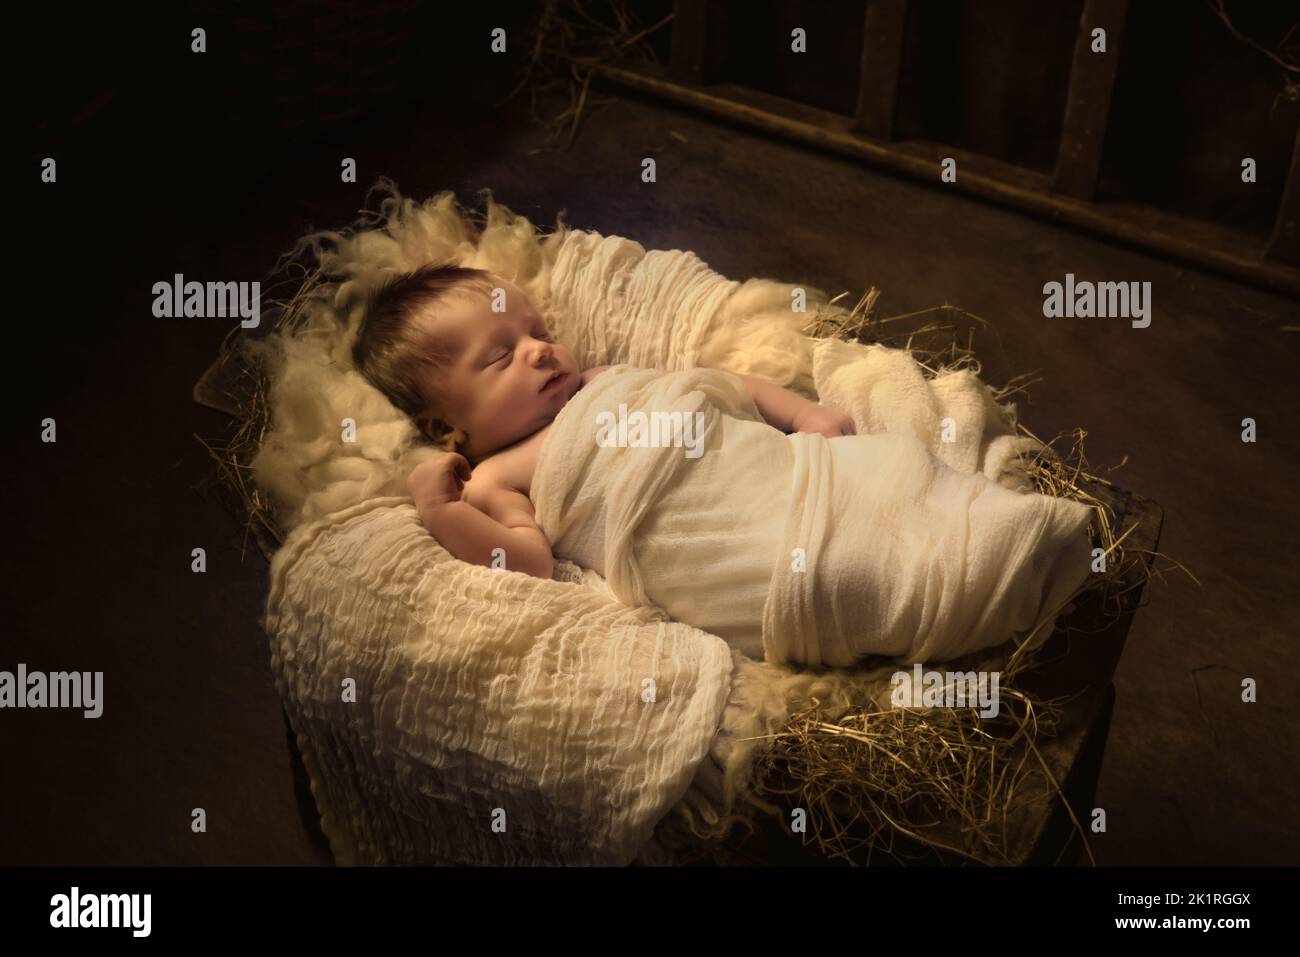 Live Christmas nativity scene of 8 days old baby boy sleeping in a manger Stock Photo